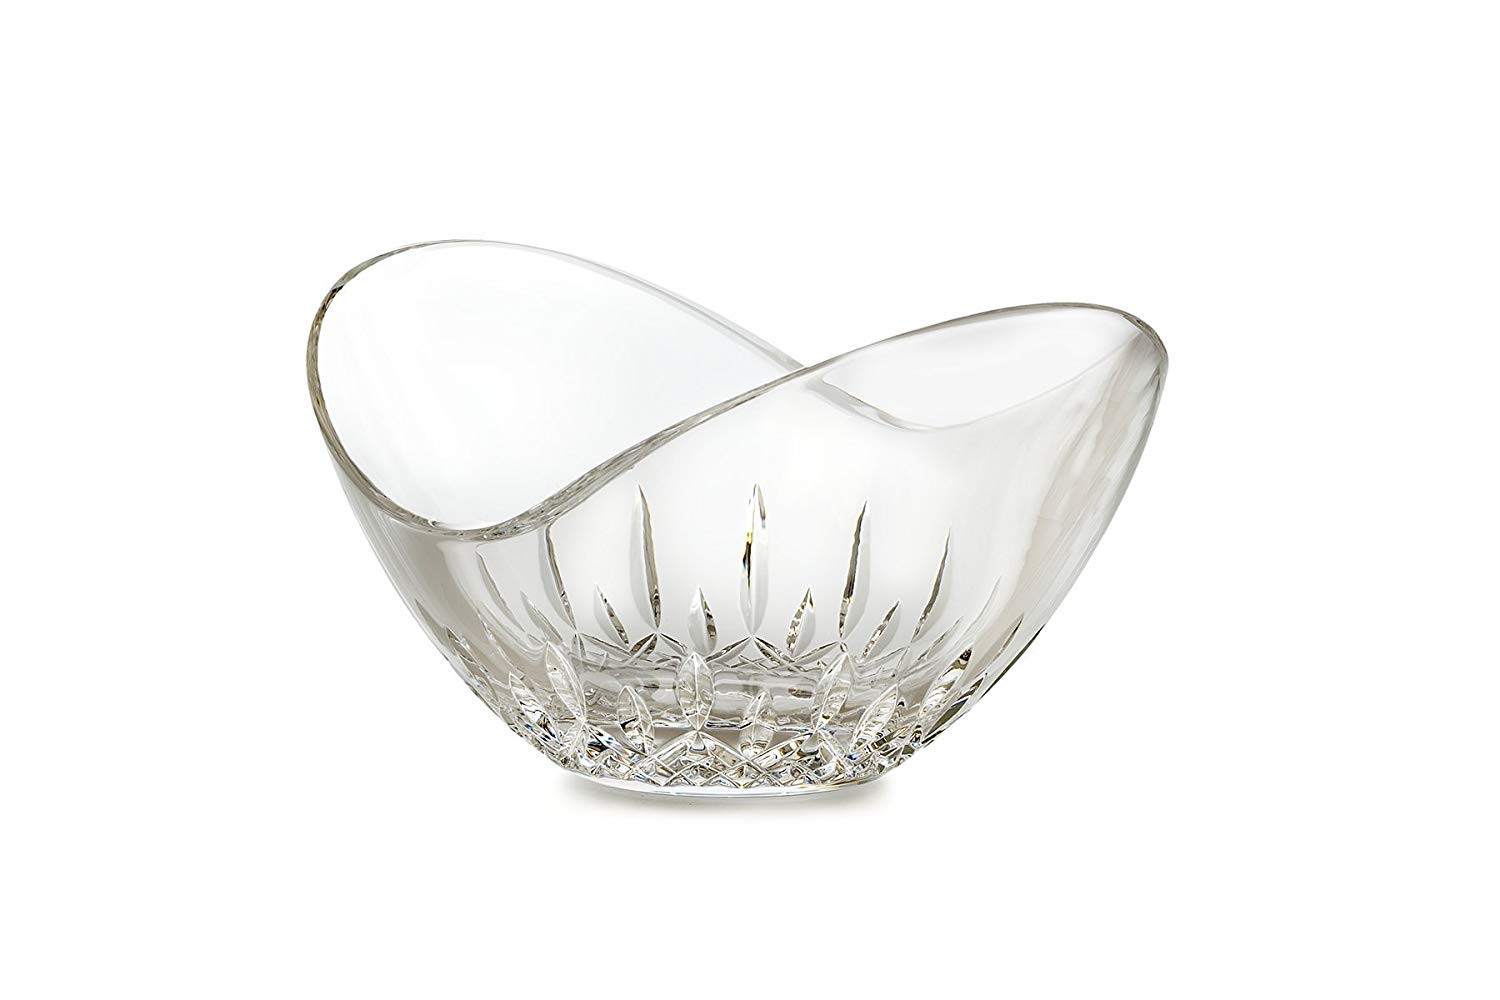 waterford lismore vase 10 inch of amazon com waterford crystal lismore essence ellipse 6 inch bowl throughout amazon com waterford crystal lismore essence ellipse 6 inch bowl decorative bowls kitchen dining